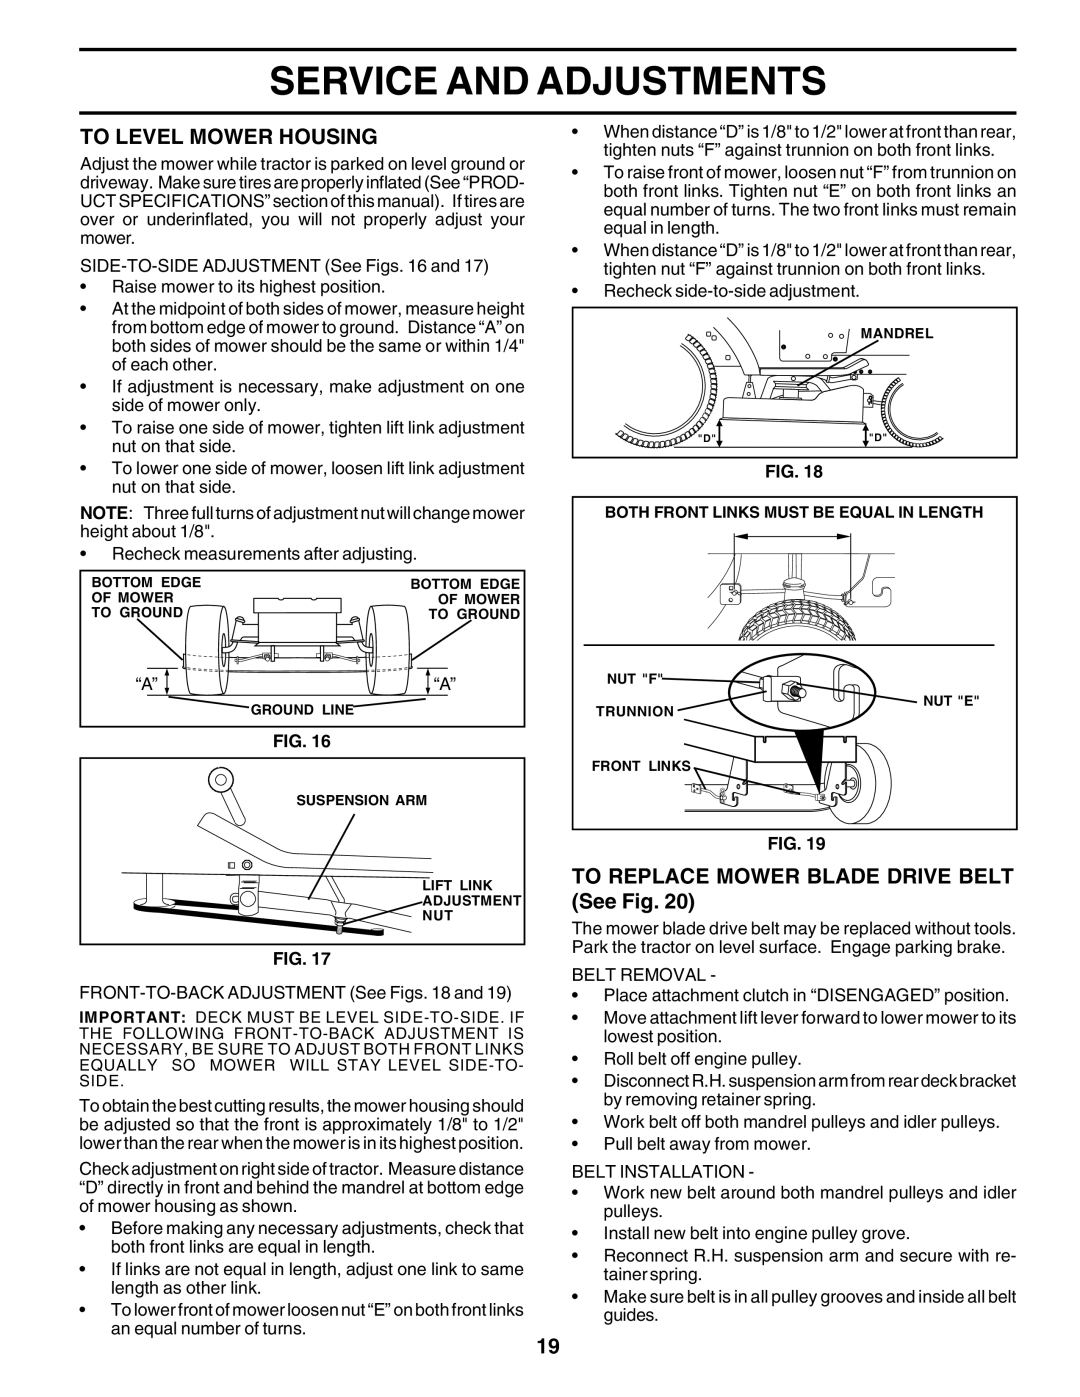 Poulan 183313 manual To Level Mower Housing, TO REPLACE MOWER BLADE DRIVE BELT See Fig, Service And Adjustments 